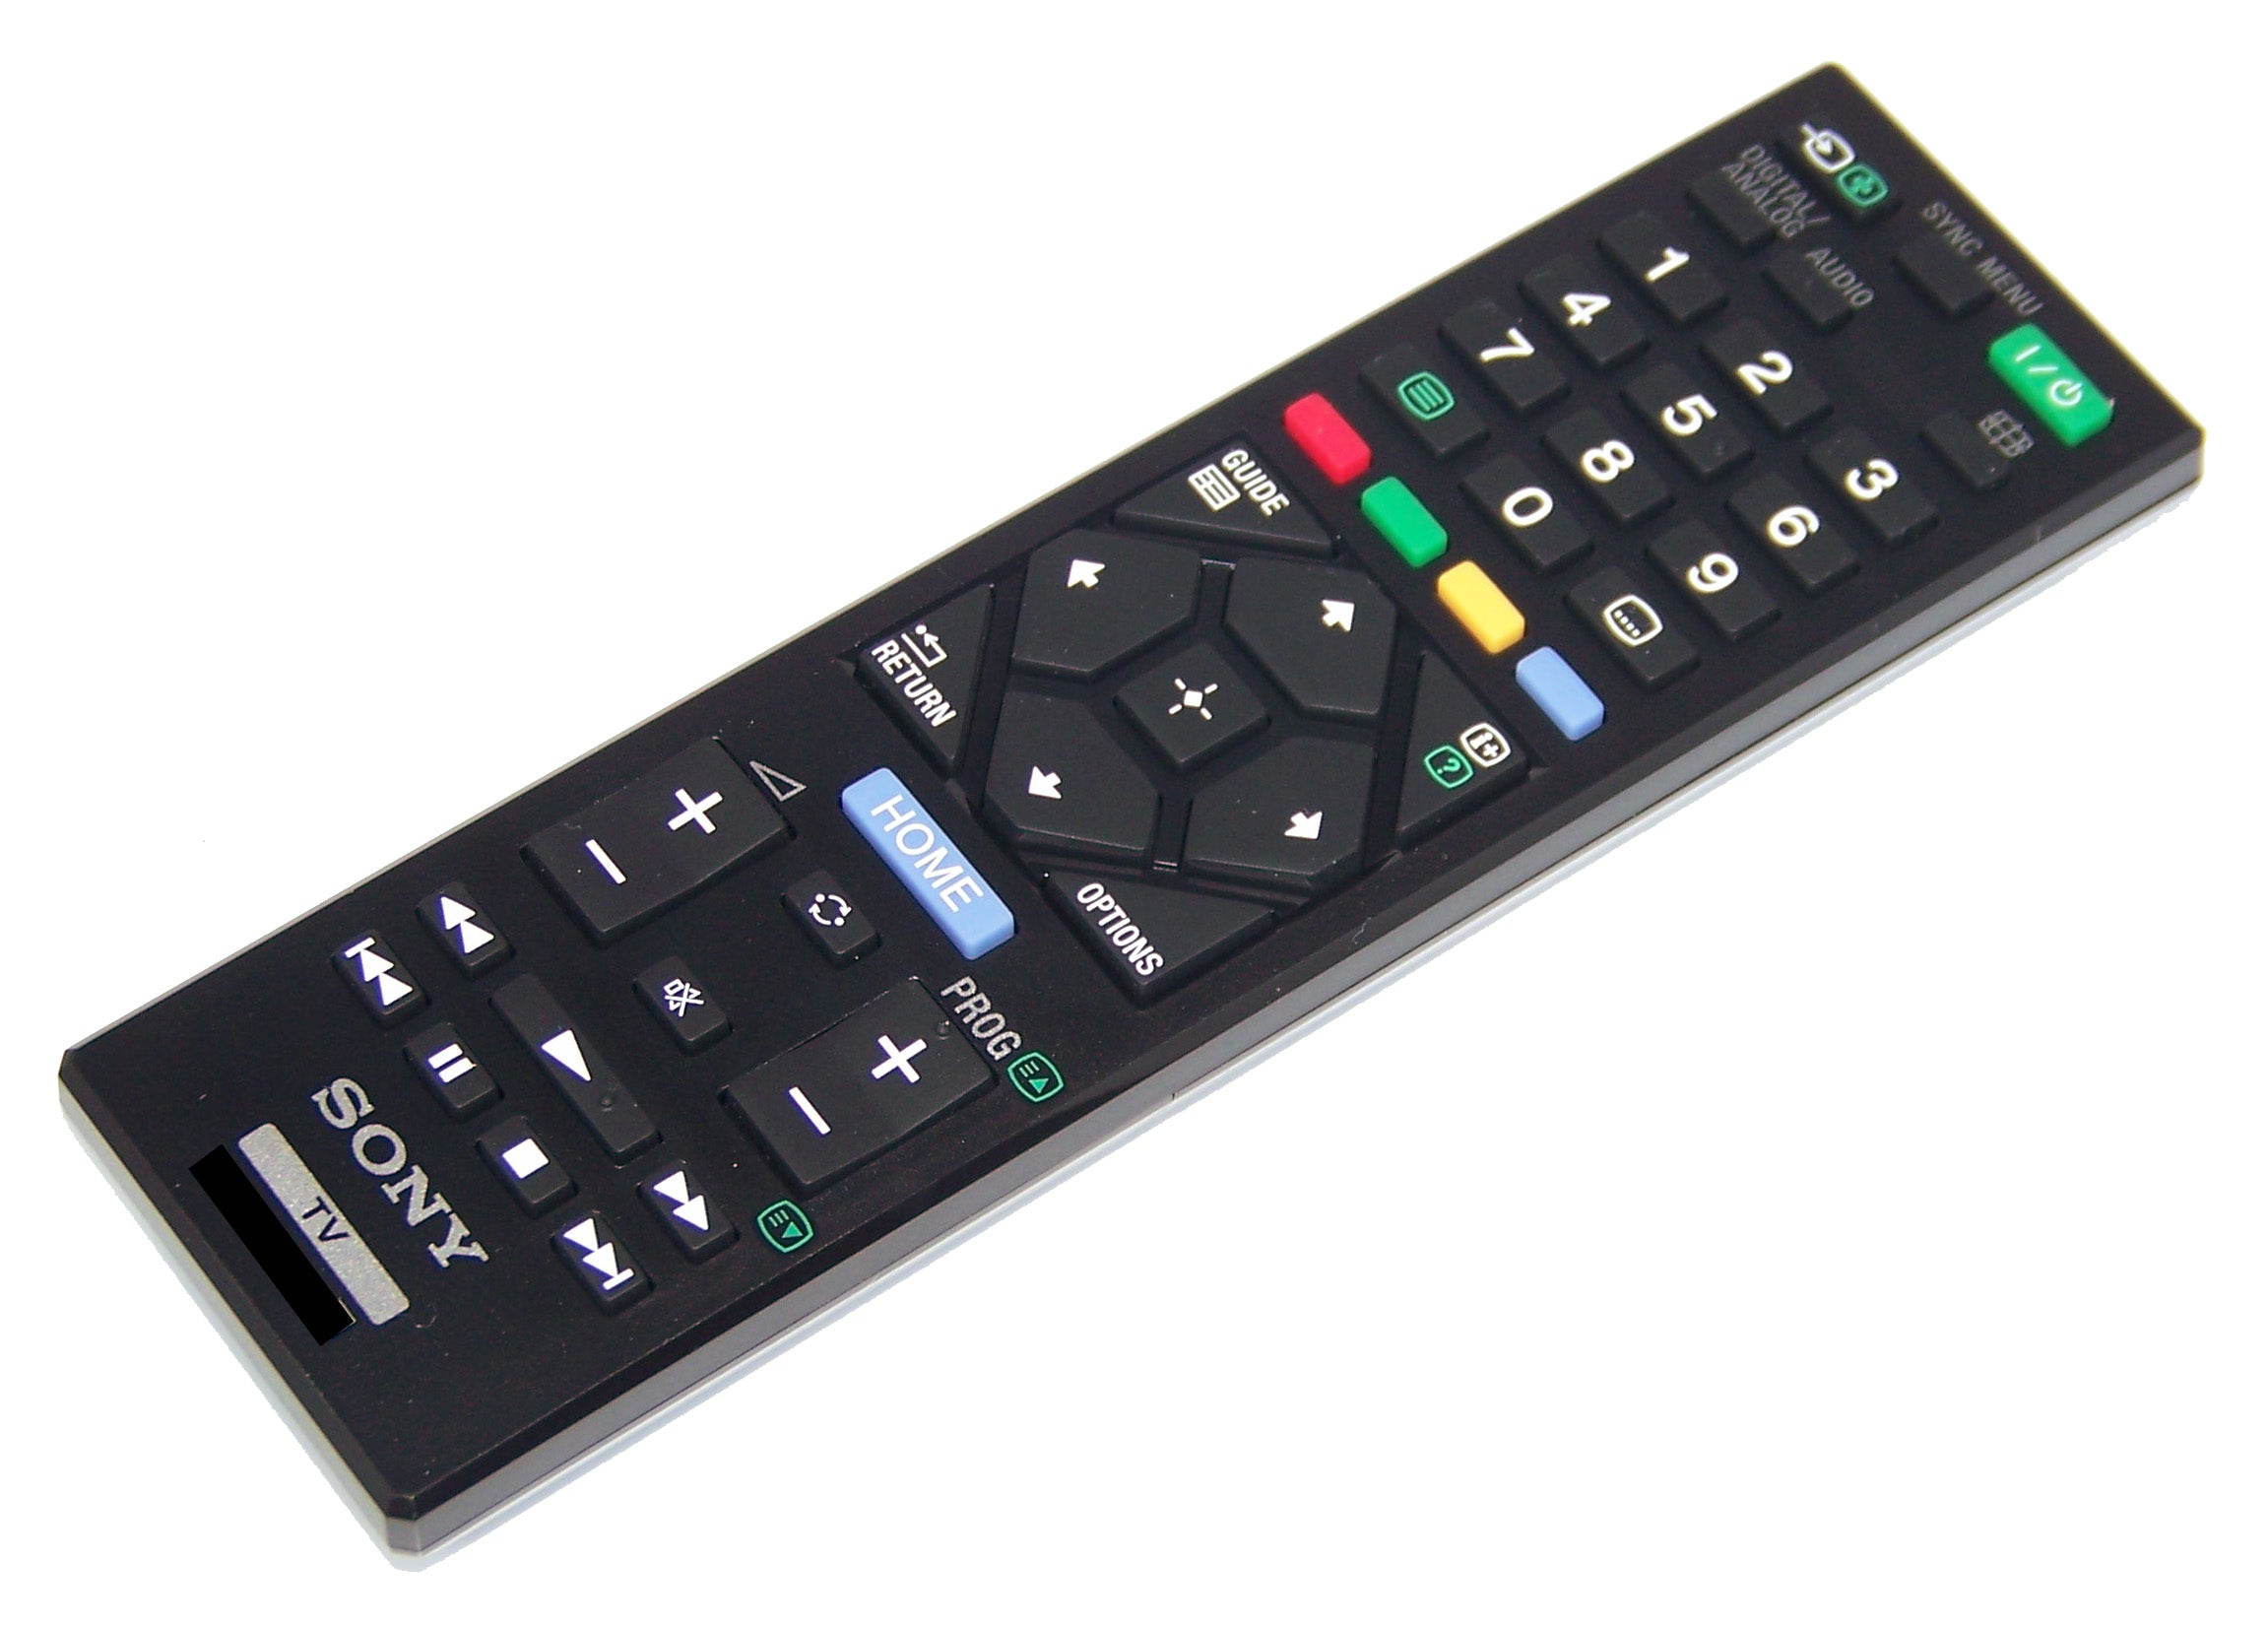 OEM Sony Remote Control Shipped With KDL-32R500C, KDL32R500C